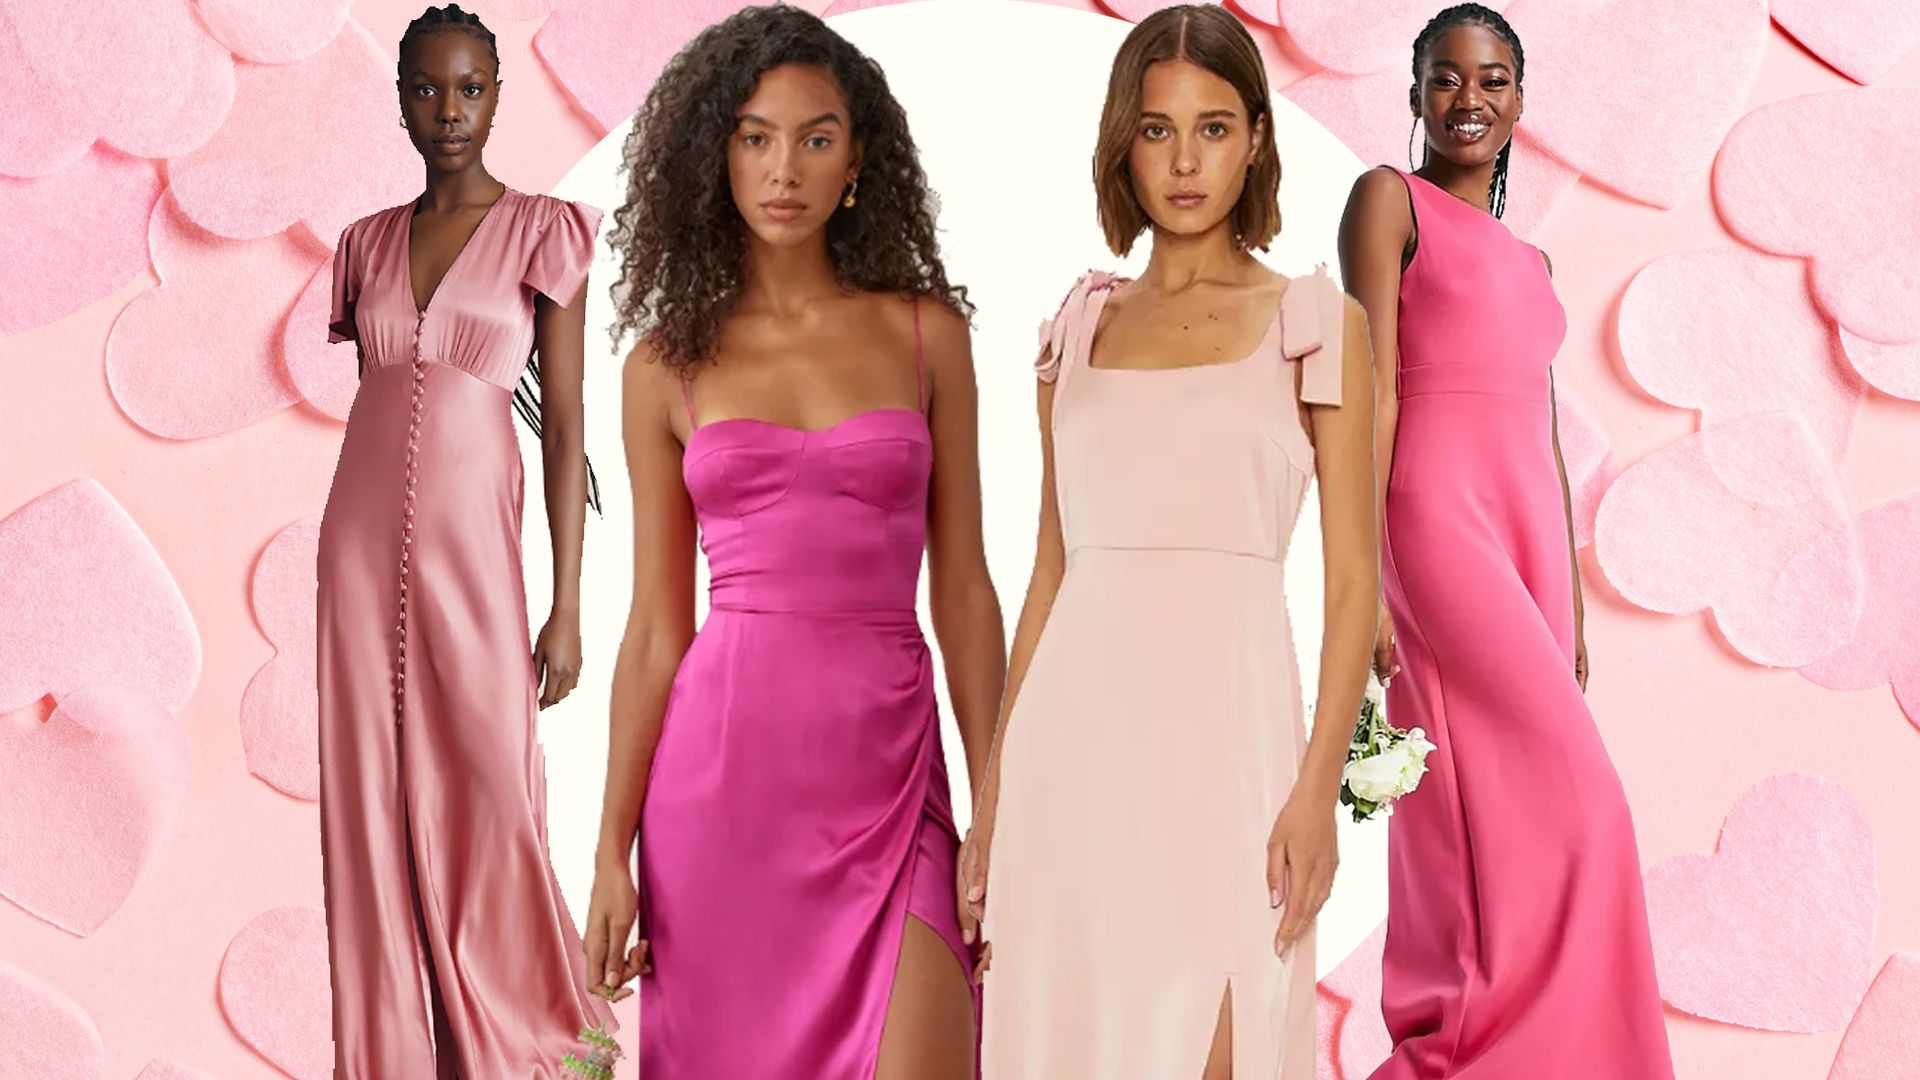 23 Seriously Stunning Silver Bridesmaid Dresses